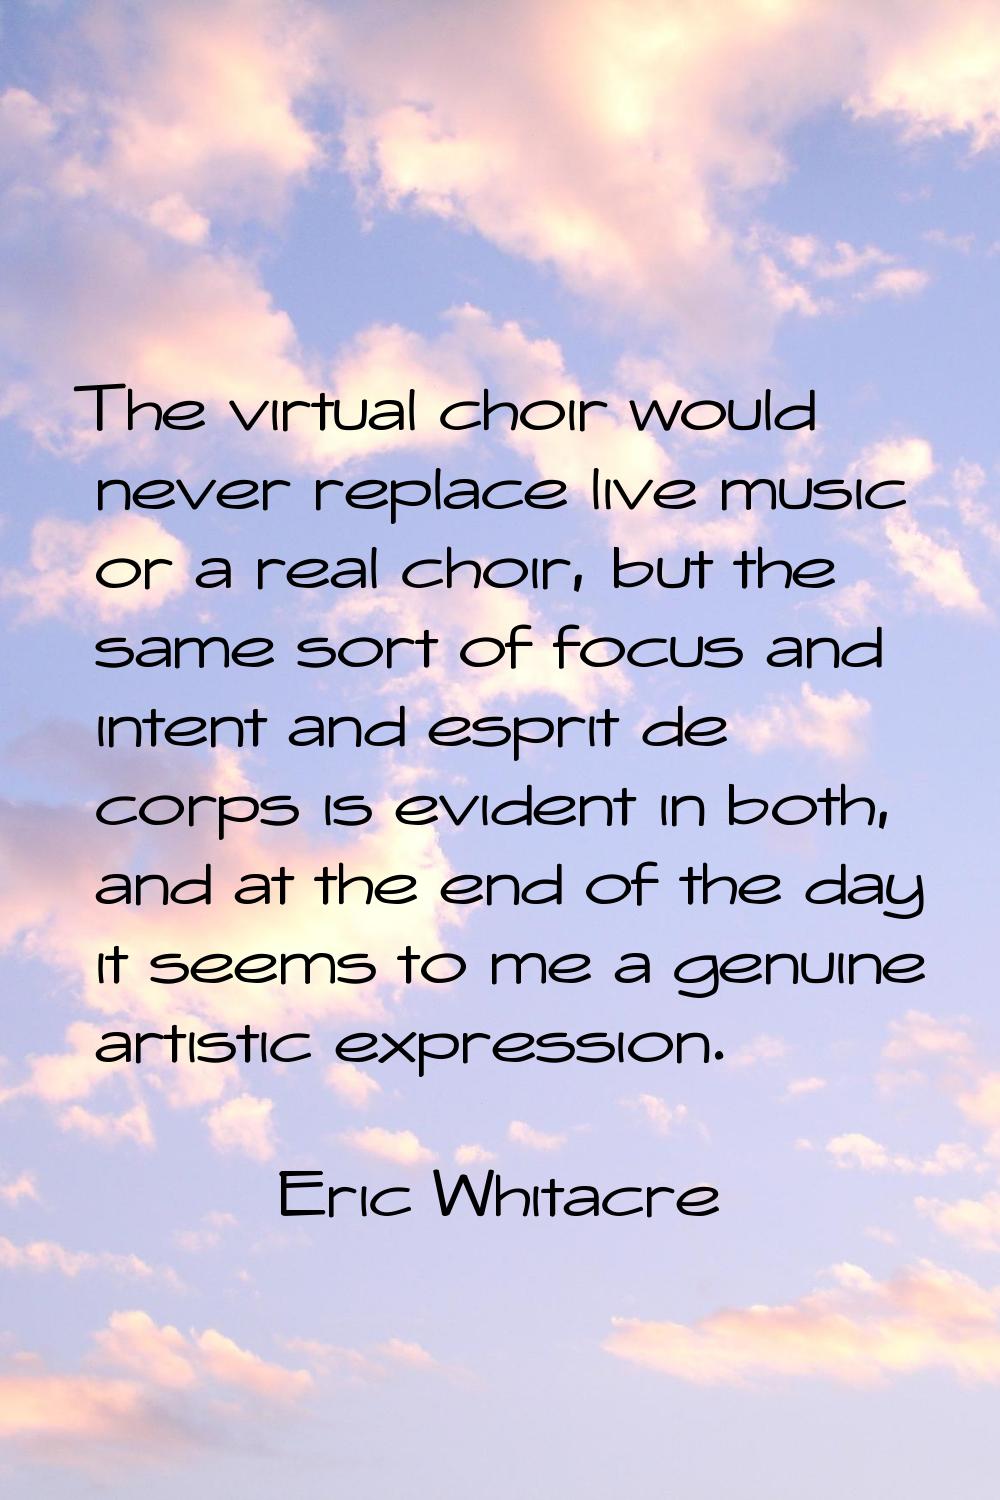 The virtual choir would never replace live music or a real choir, but the same sort of focus and in